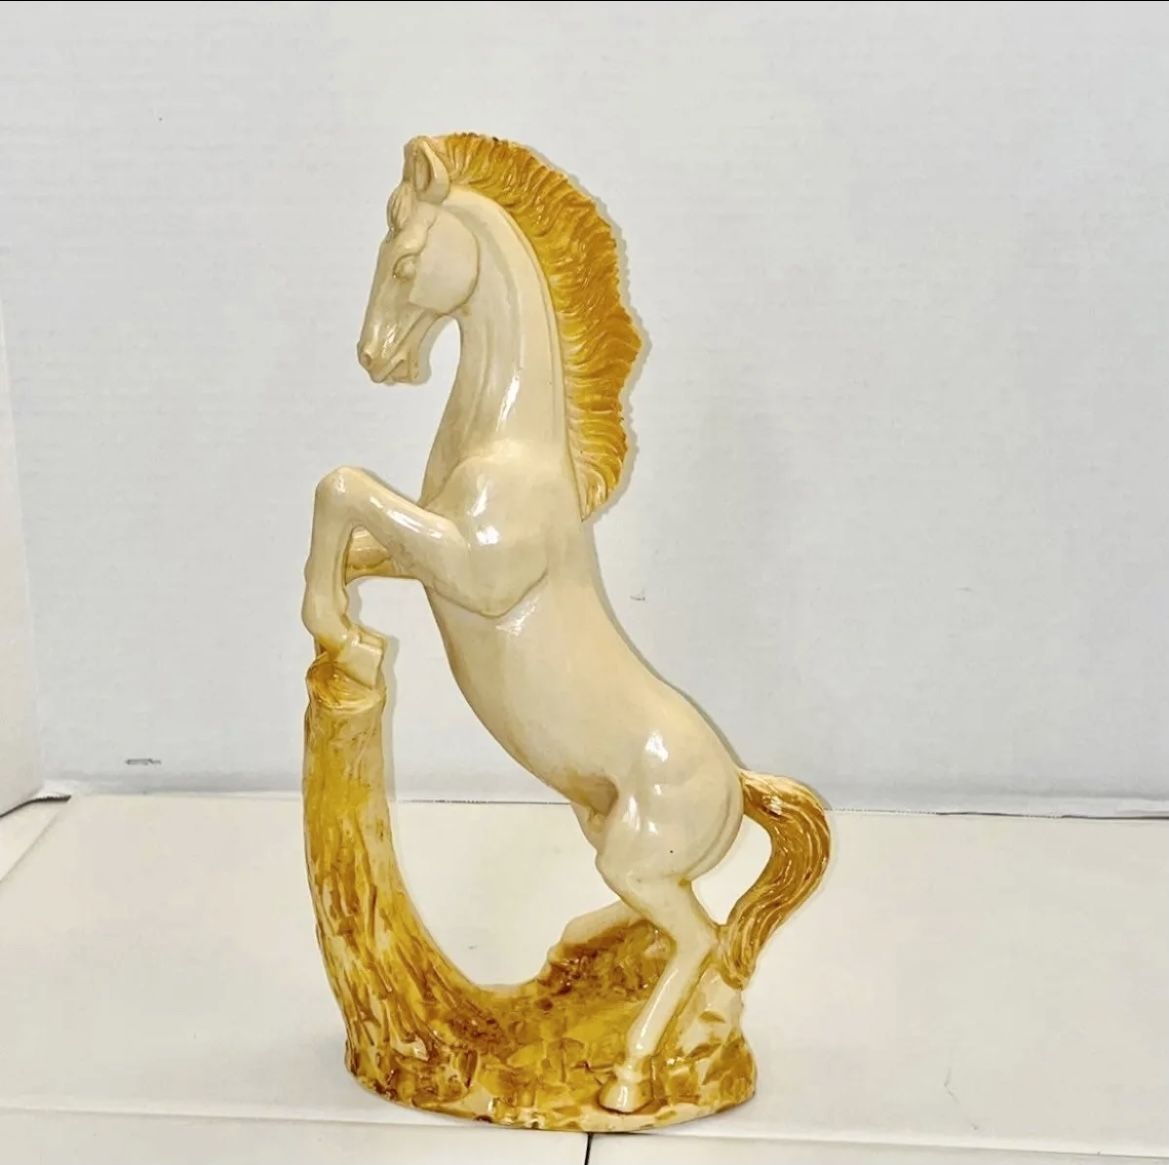 RARE Vintage Italy 1950’s MCM Mid Century Modern 14” Large Signed RB Hand Carved Resin Rearing Horse Sculpture